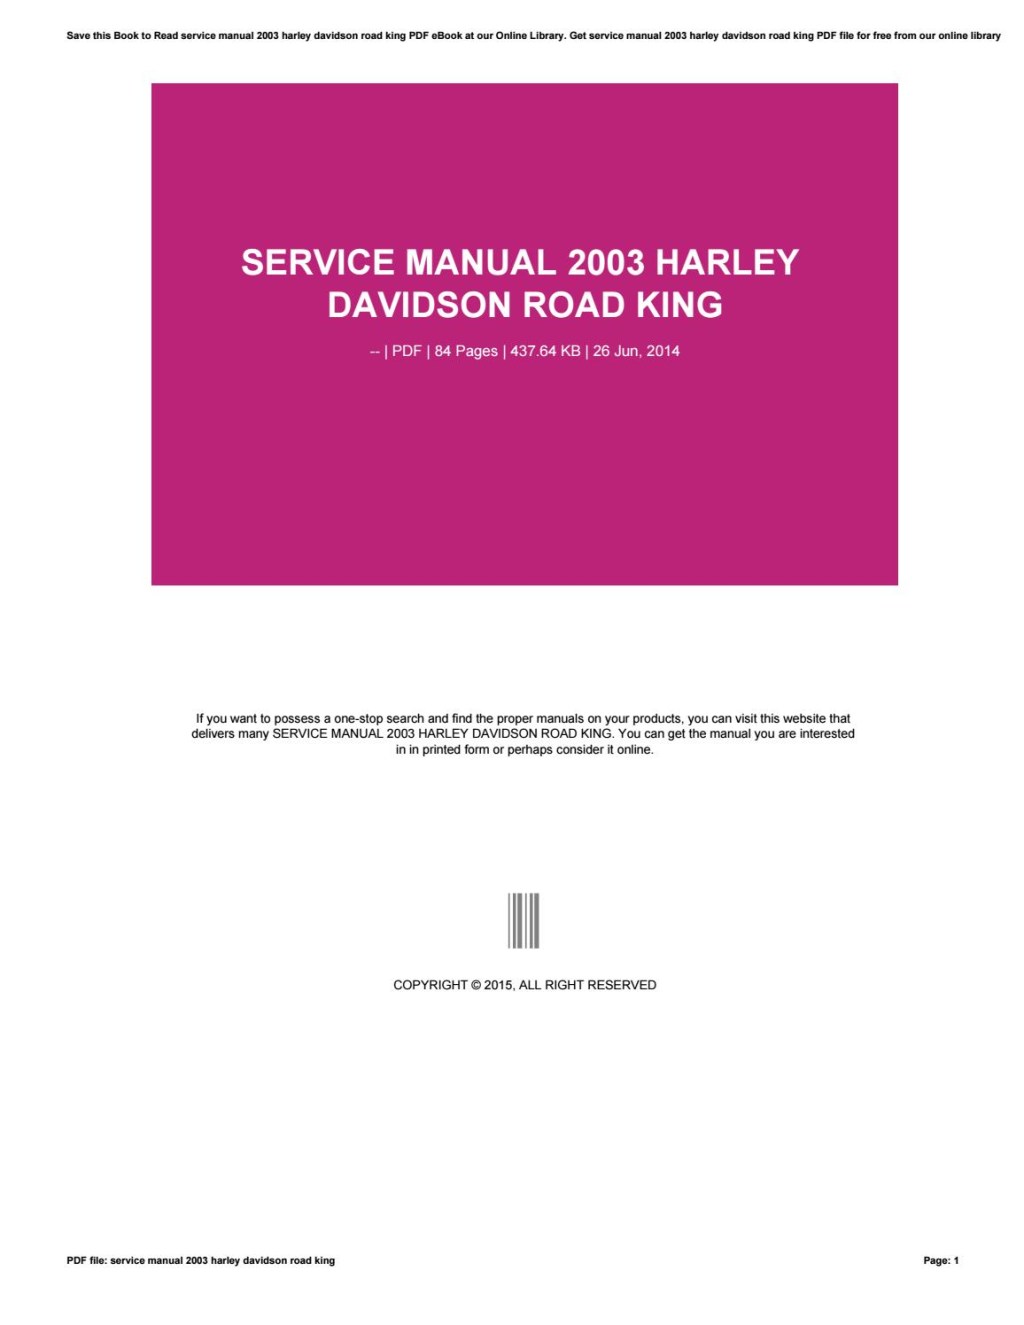 Picture of: Service manual  harley davidson road king by u – Issuu